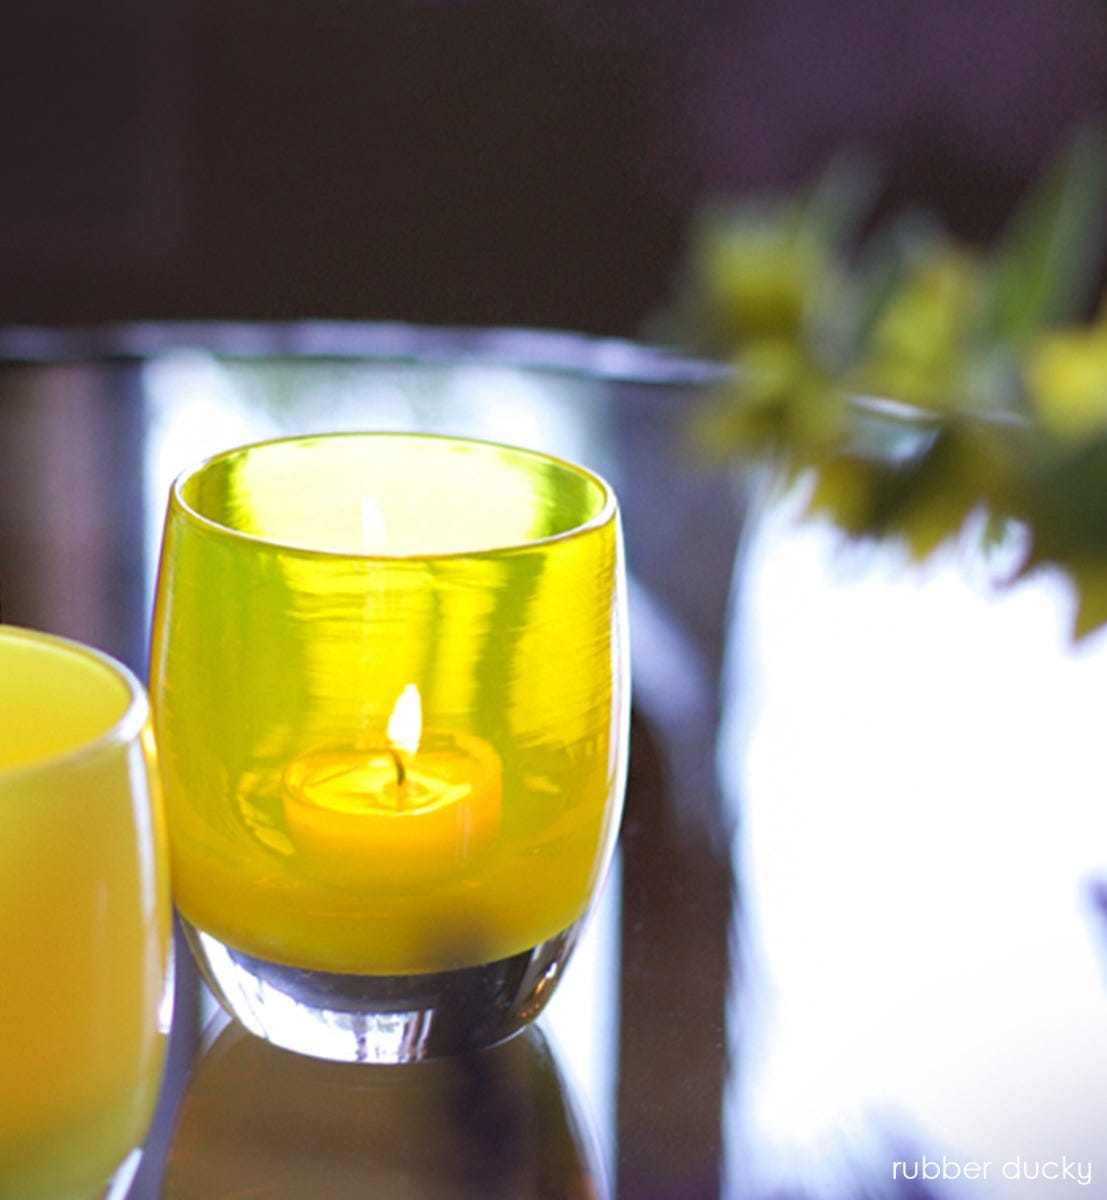 rubber ducky transparent yellow hand-blown glass votive candle holder